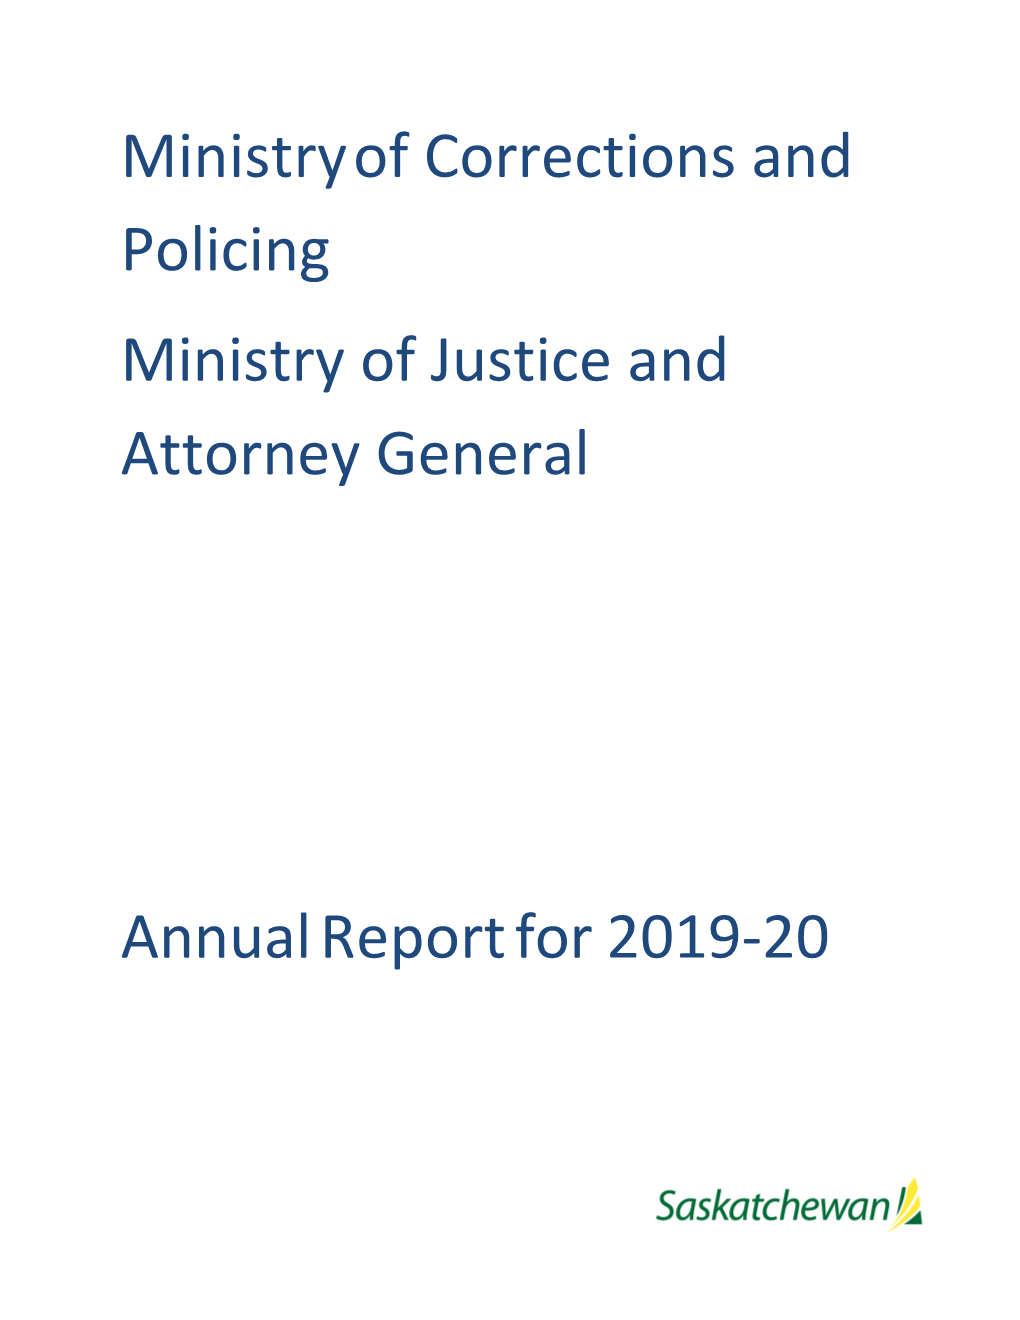 The Ministry of Corrections and Policing 2019-20 Annual